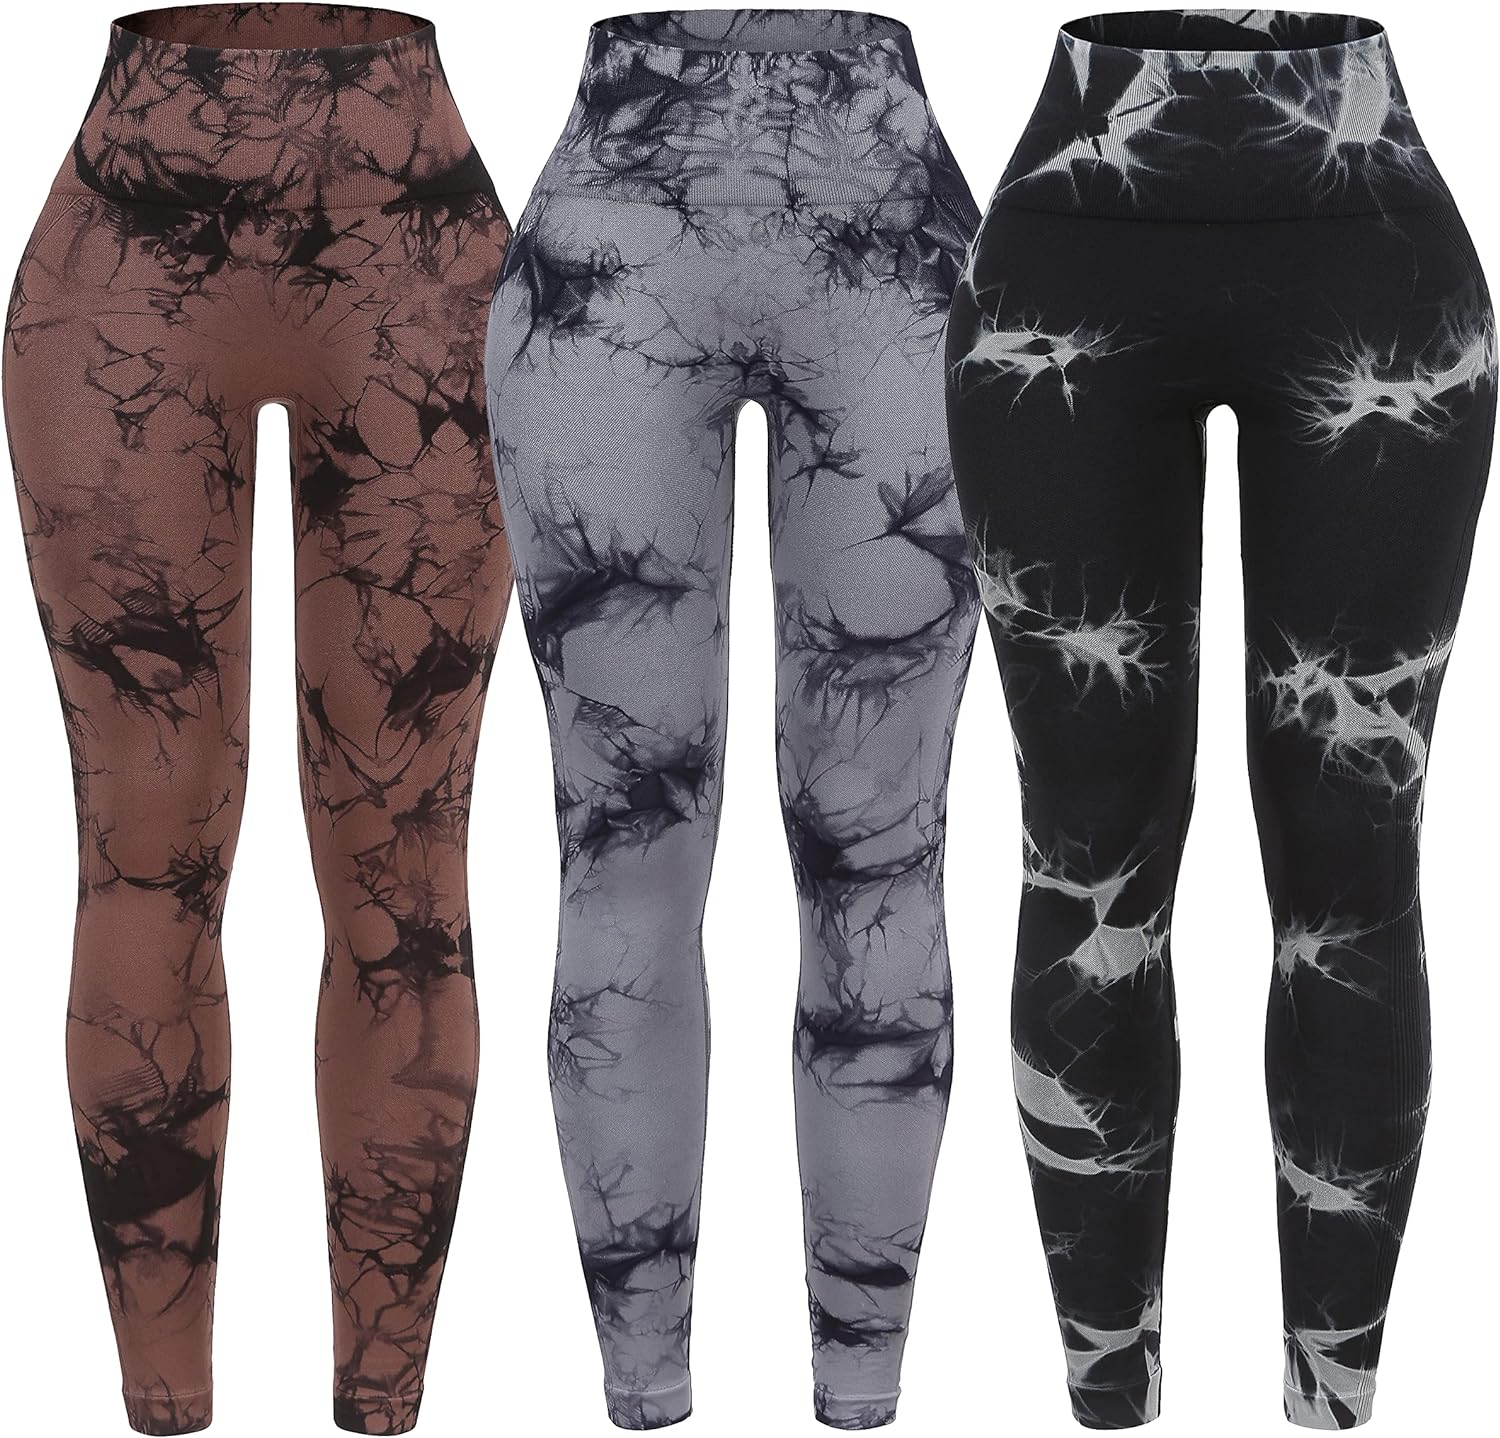 OVESPORT 3 Pack Tie Dye Seamless High Waisted Workout Leggings for Women Scrunch Butt Lifting Yoga Gym Athletic Pants